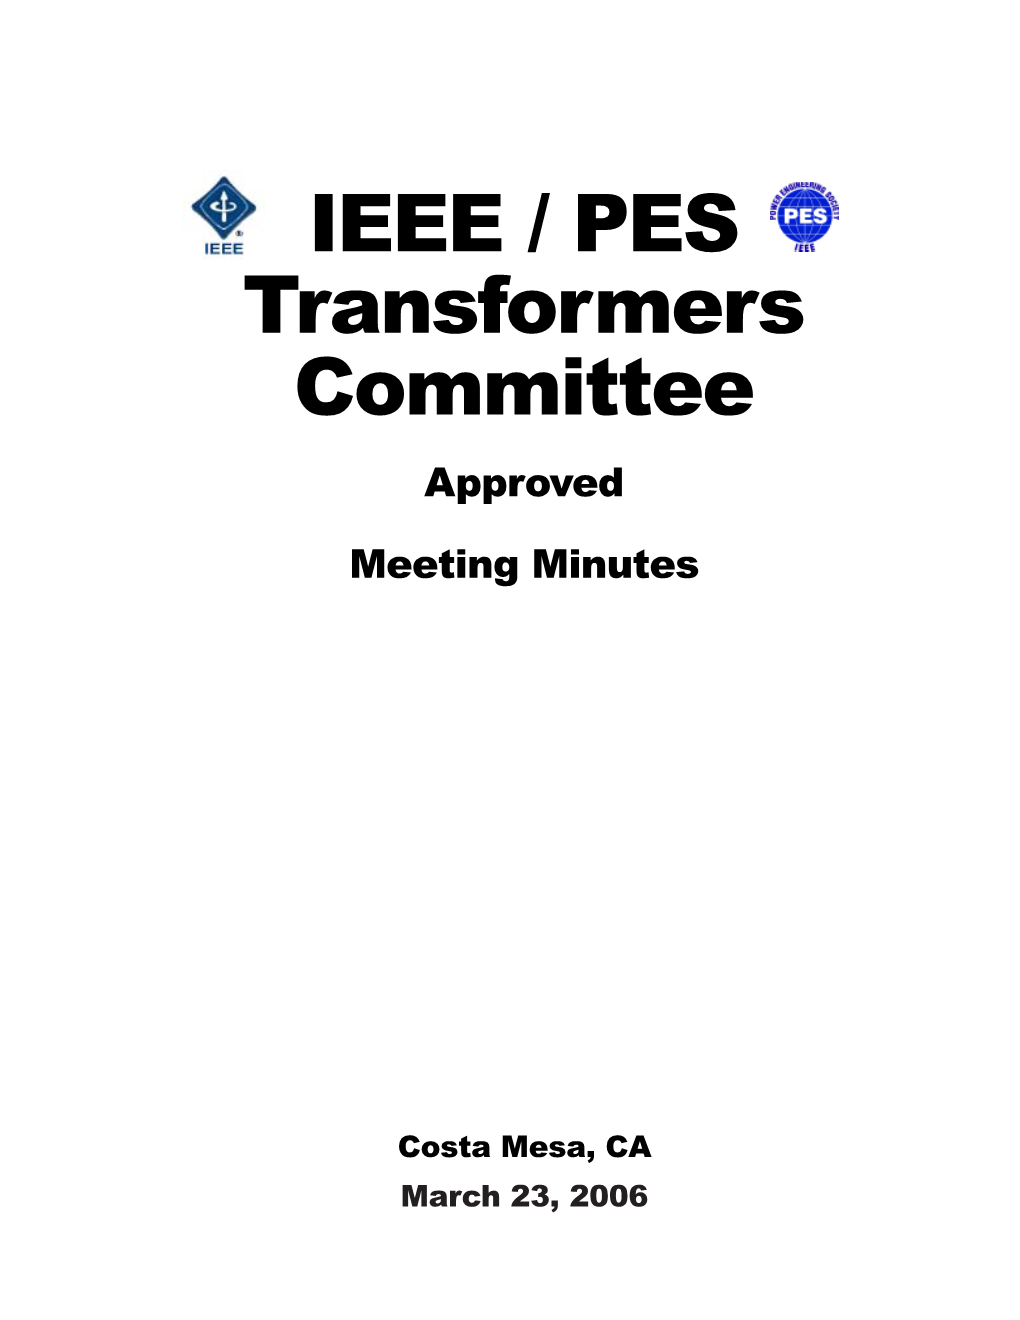 Transformer Committee Minutes